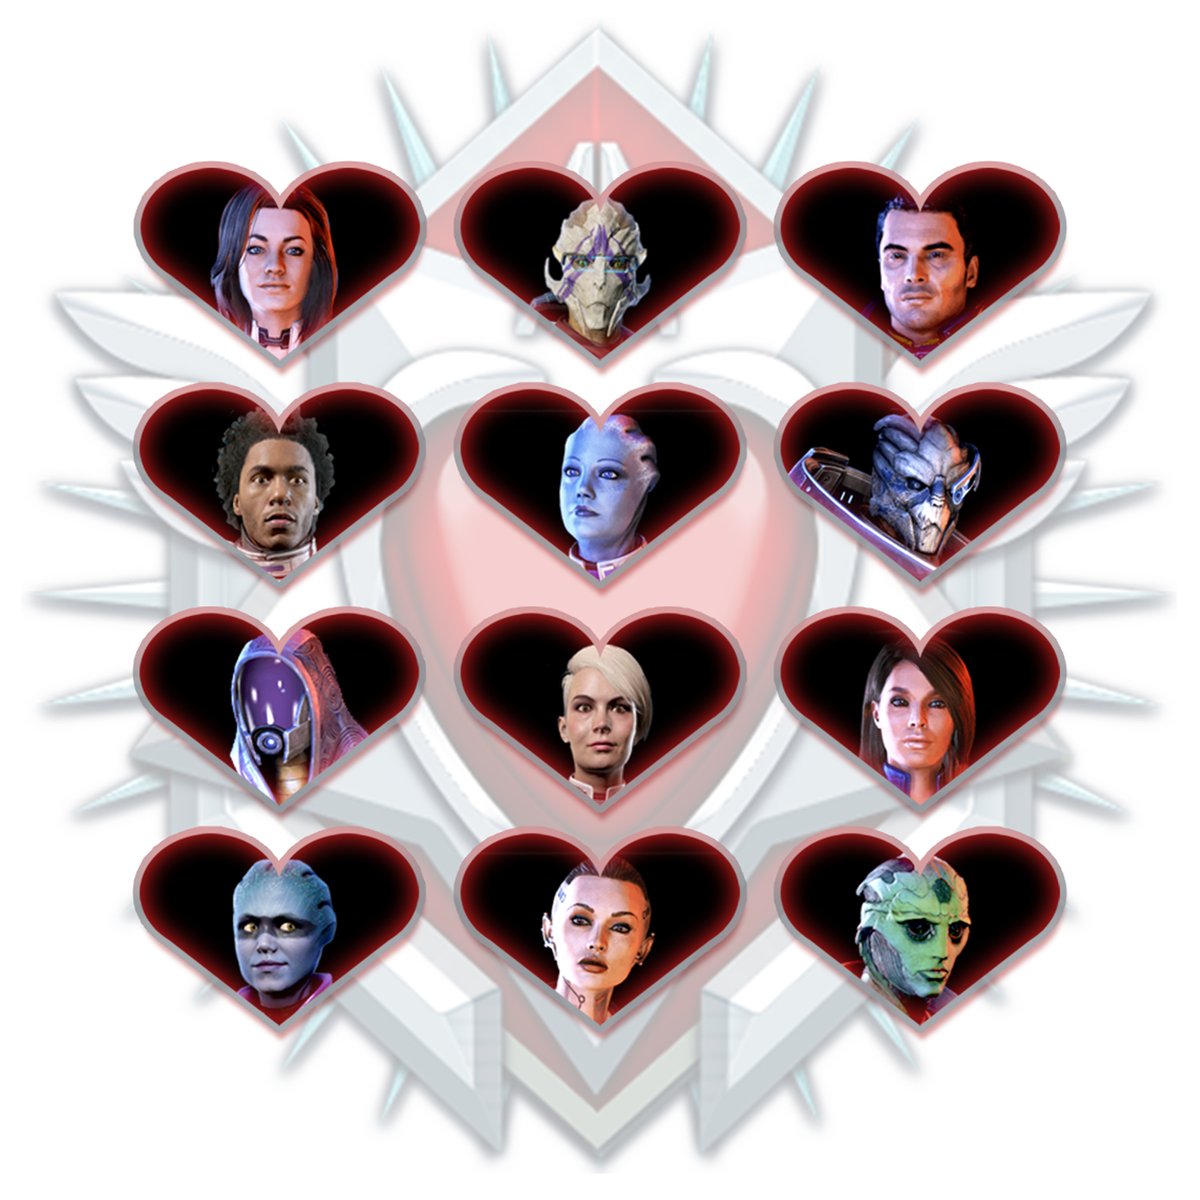 It’s #ValentinesDay! Who’s your paramour? #masseffect